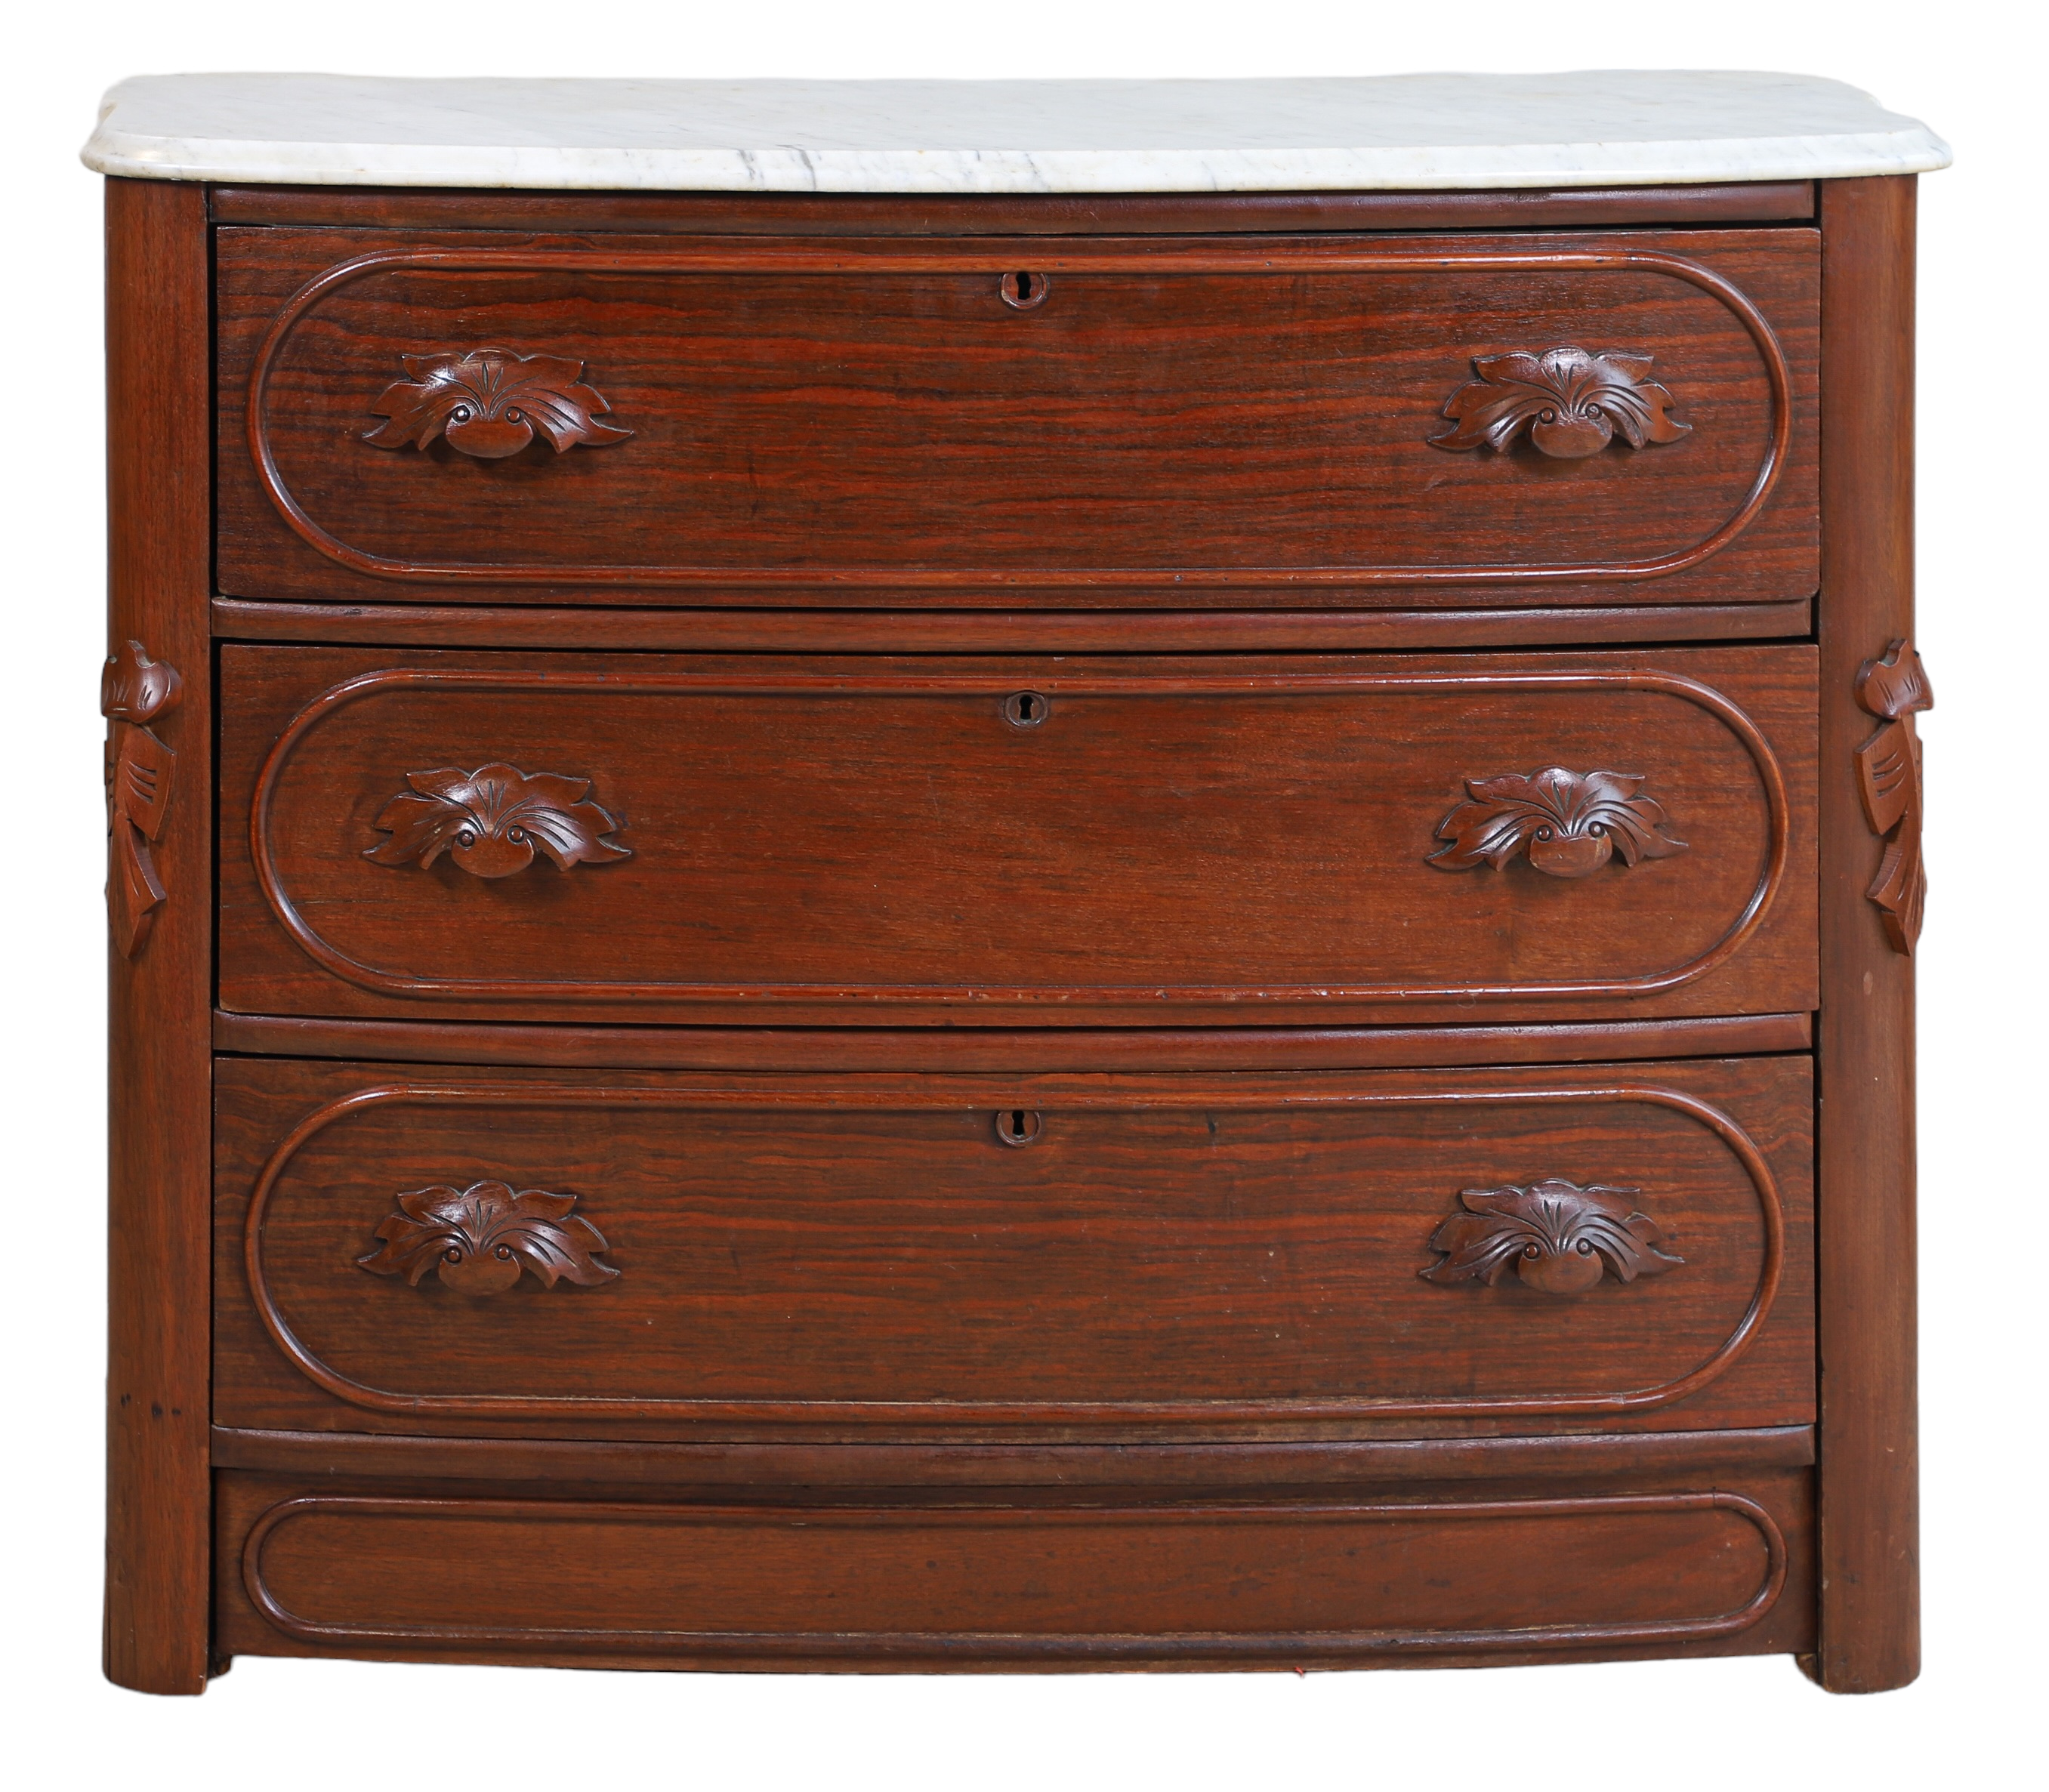 Victorian marbletop chest of drawers  3b1704